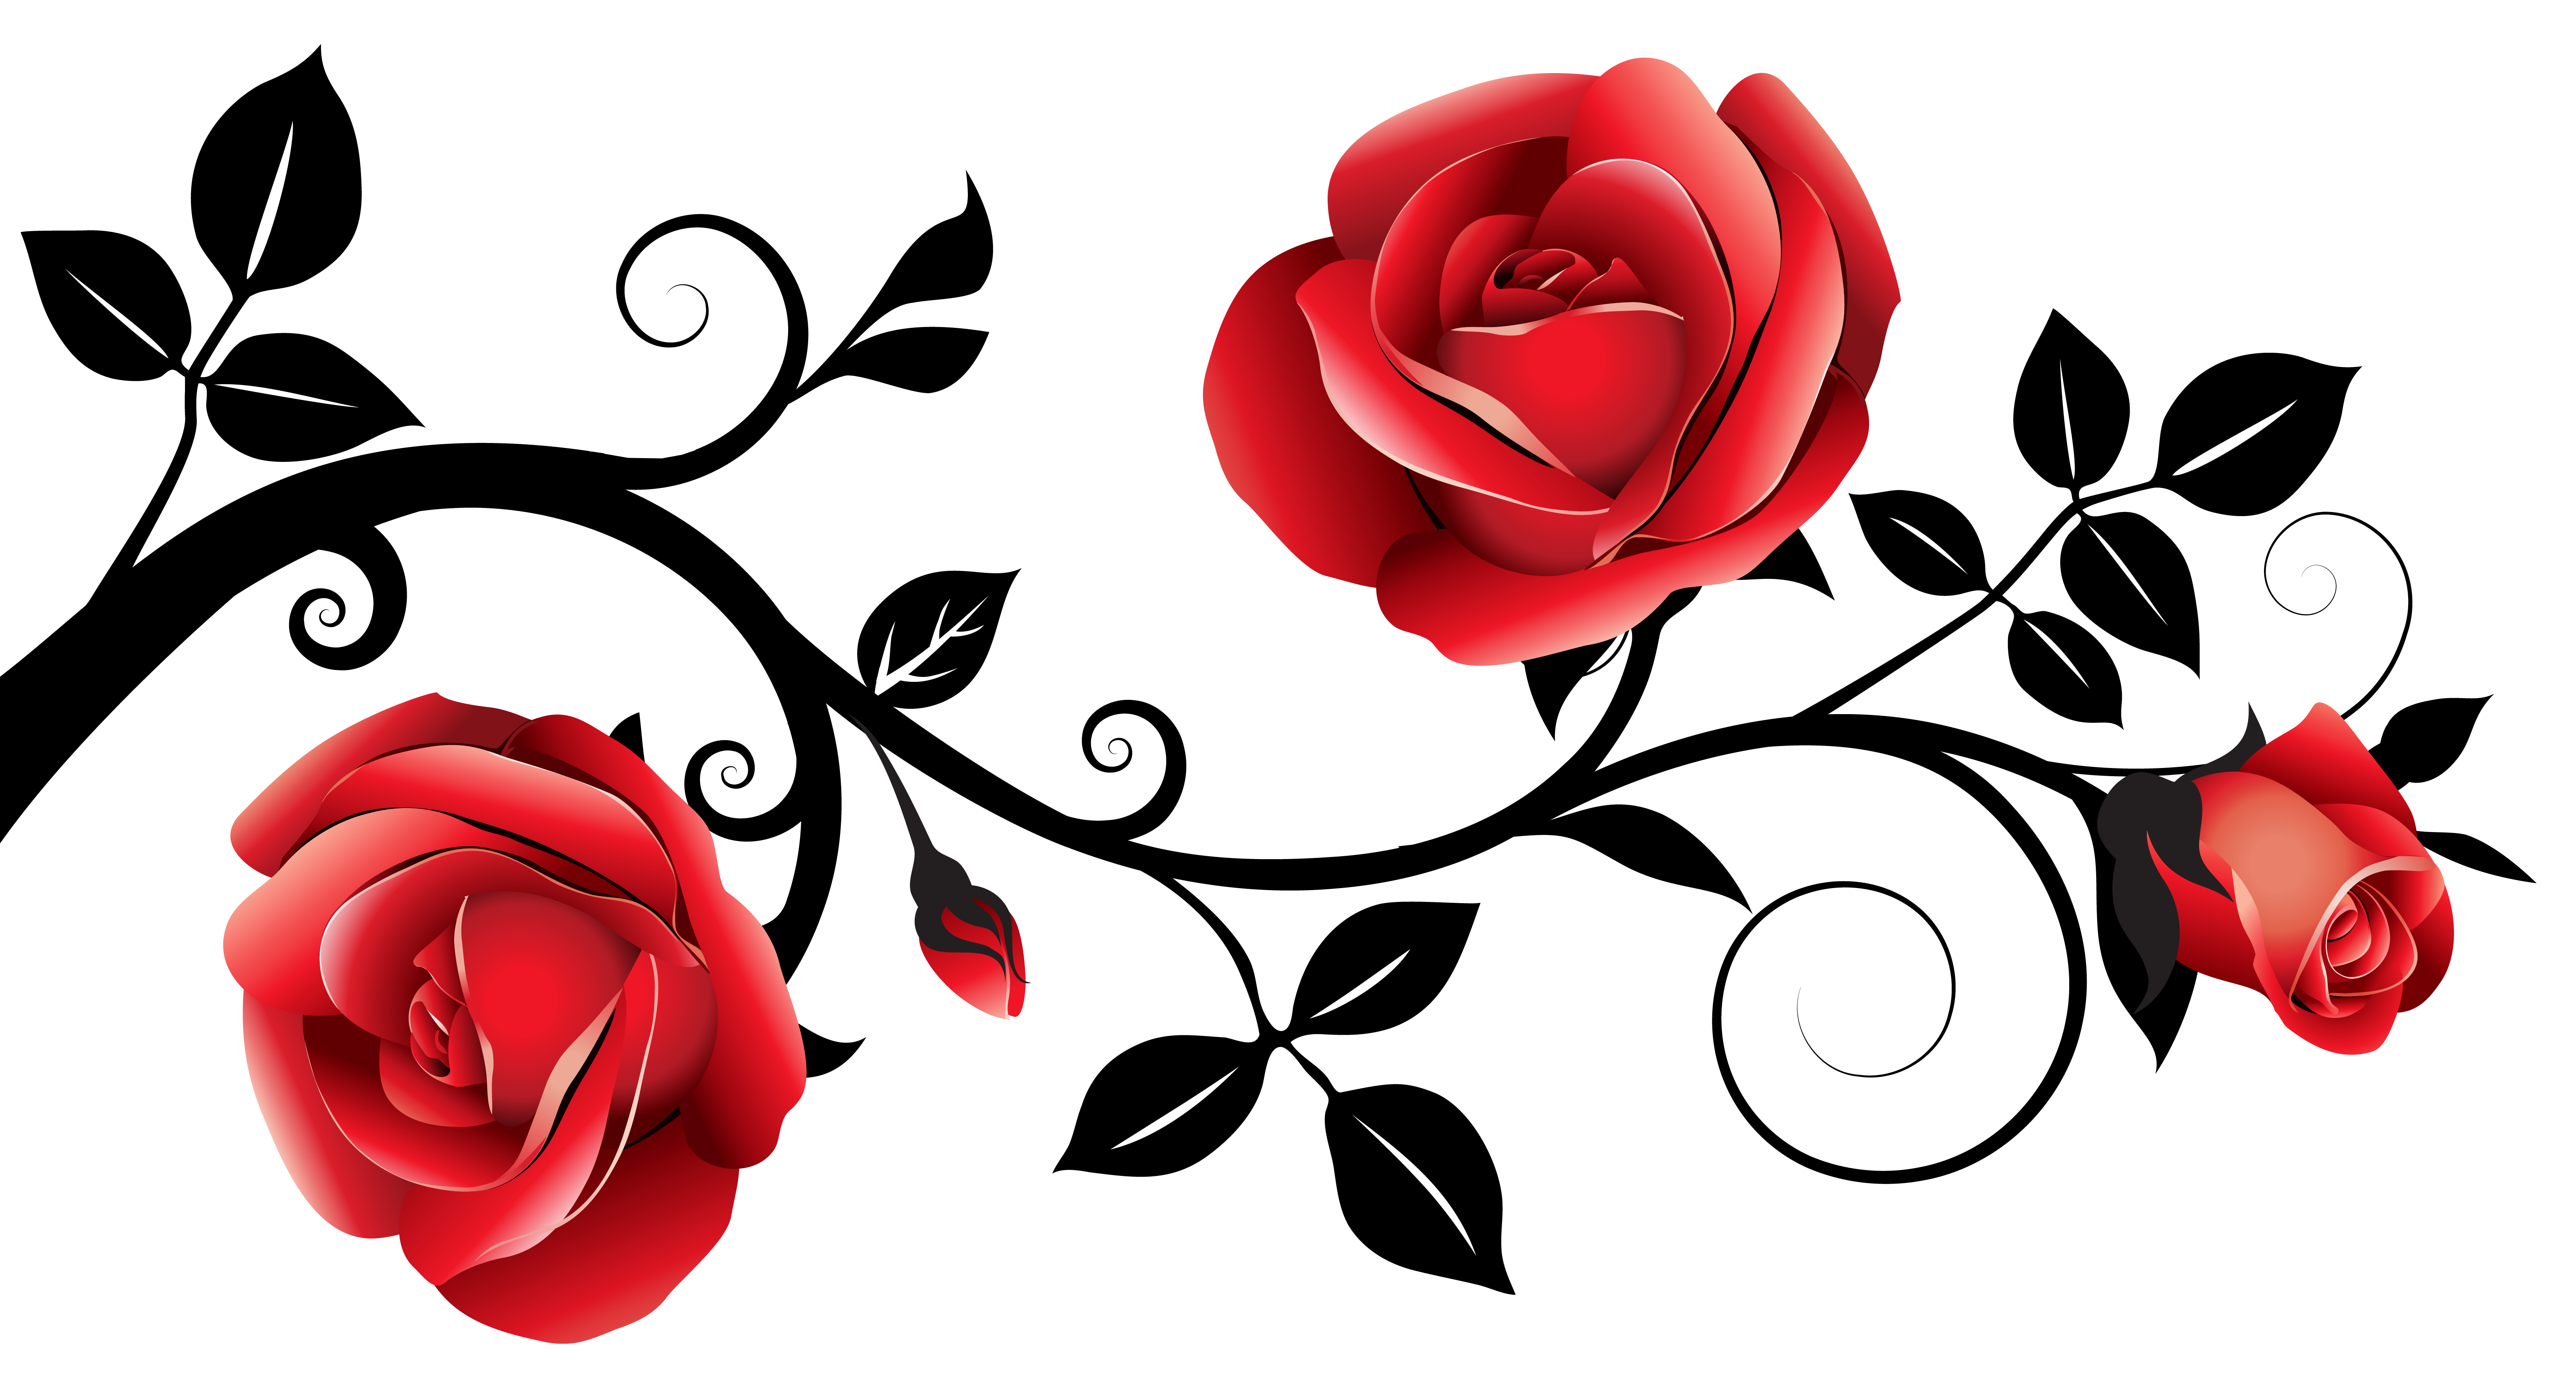 Red and black decorative. Engagement clipart rose